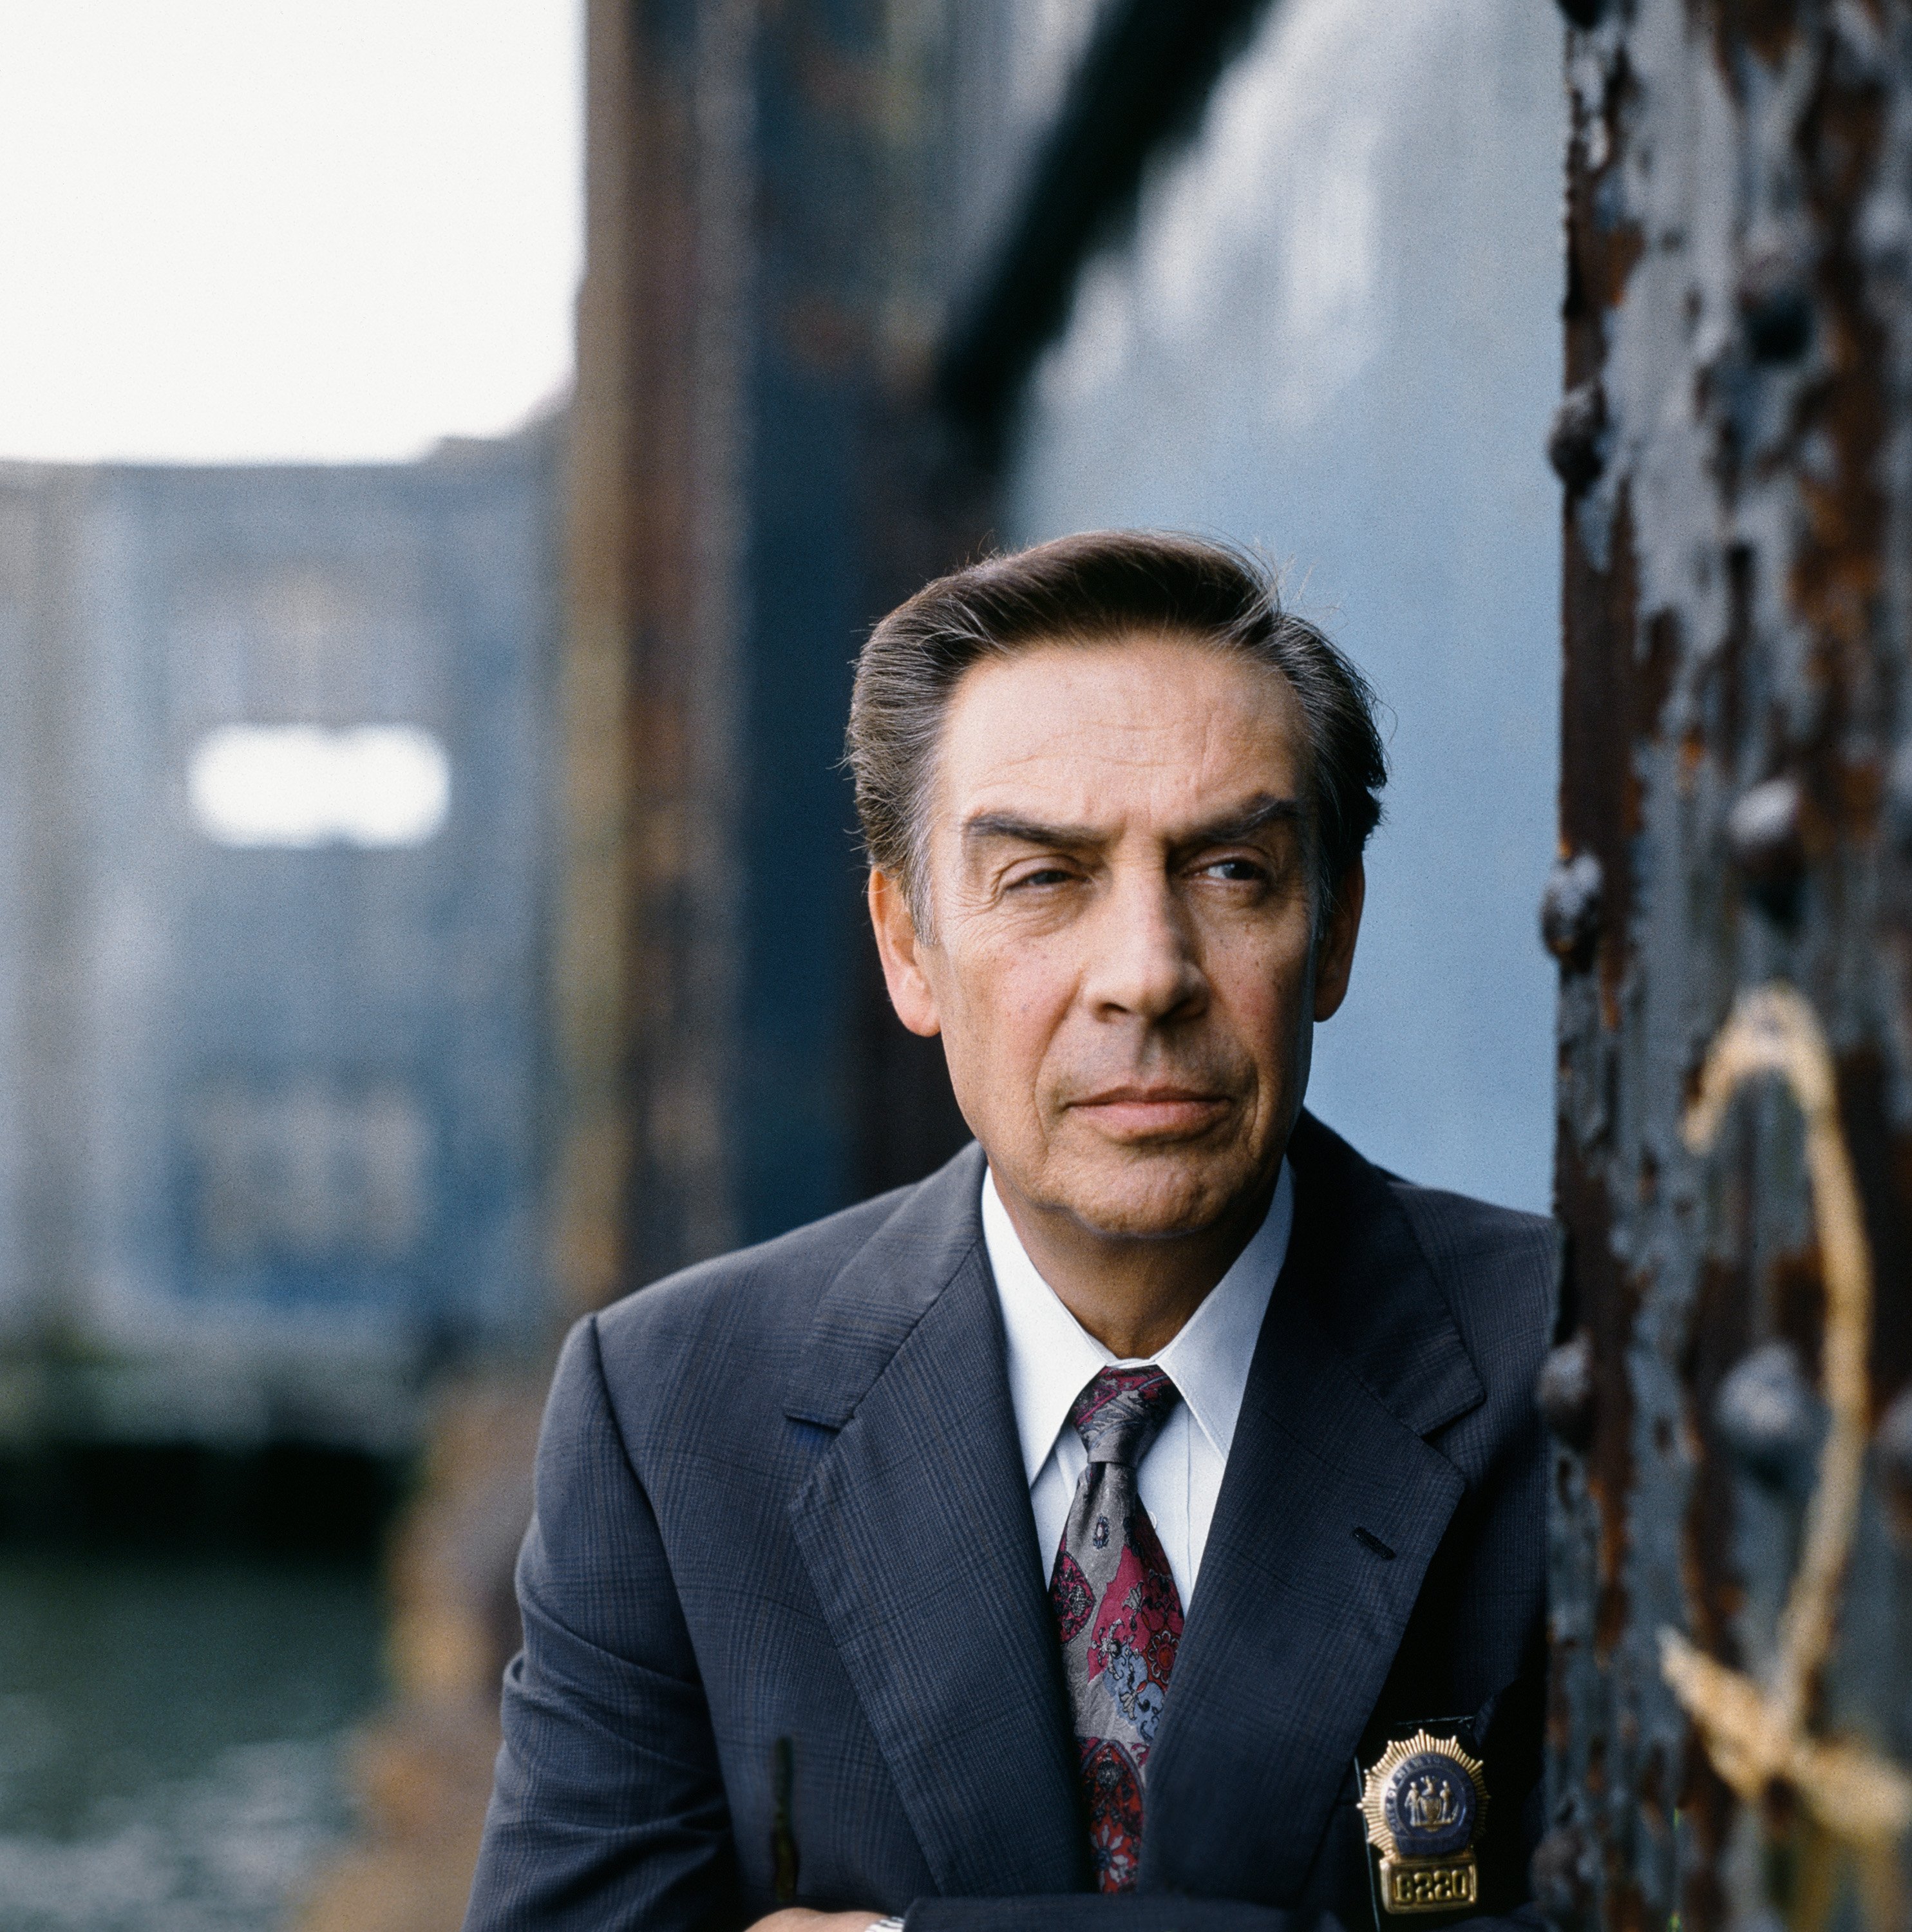 Jerry Orbach as Detective Lennie Briscoe on Season 7 of "Law & Order" | Source: Getty Images